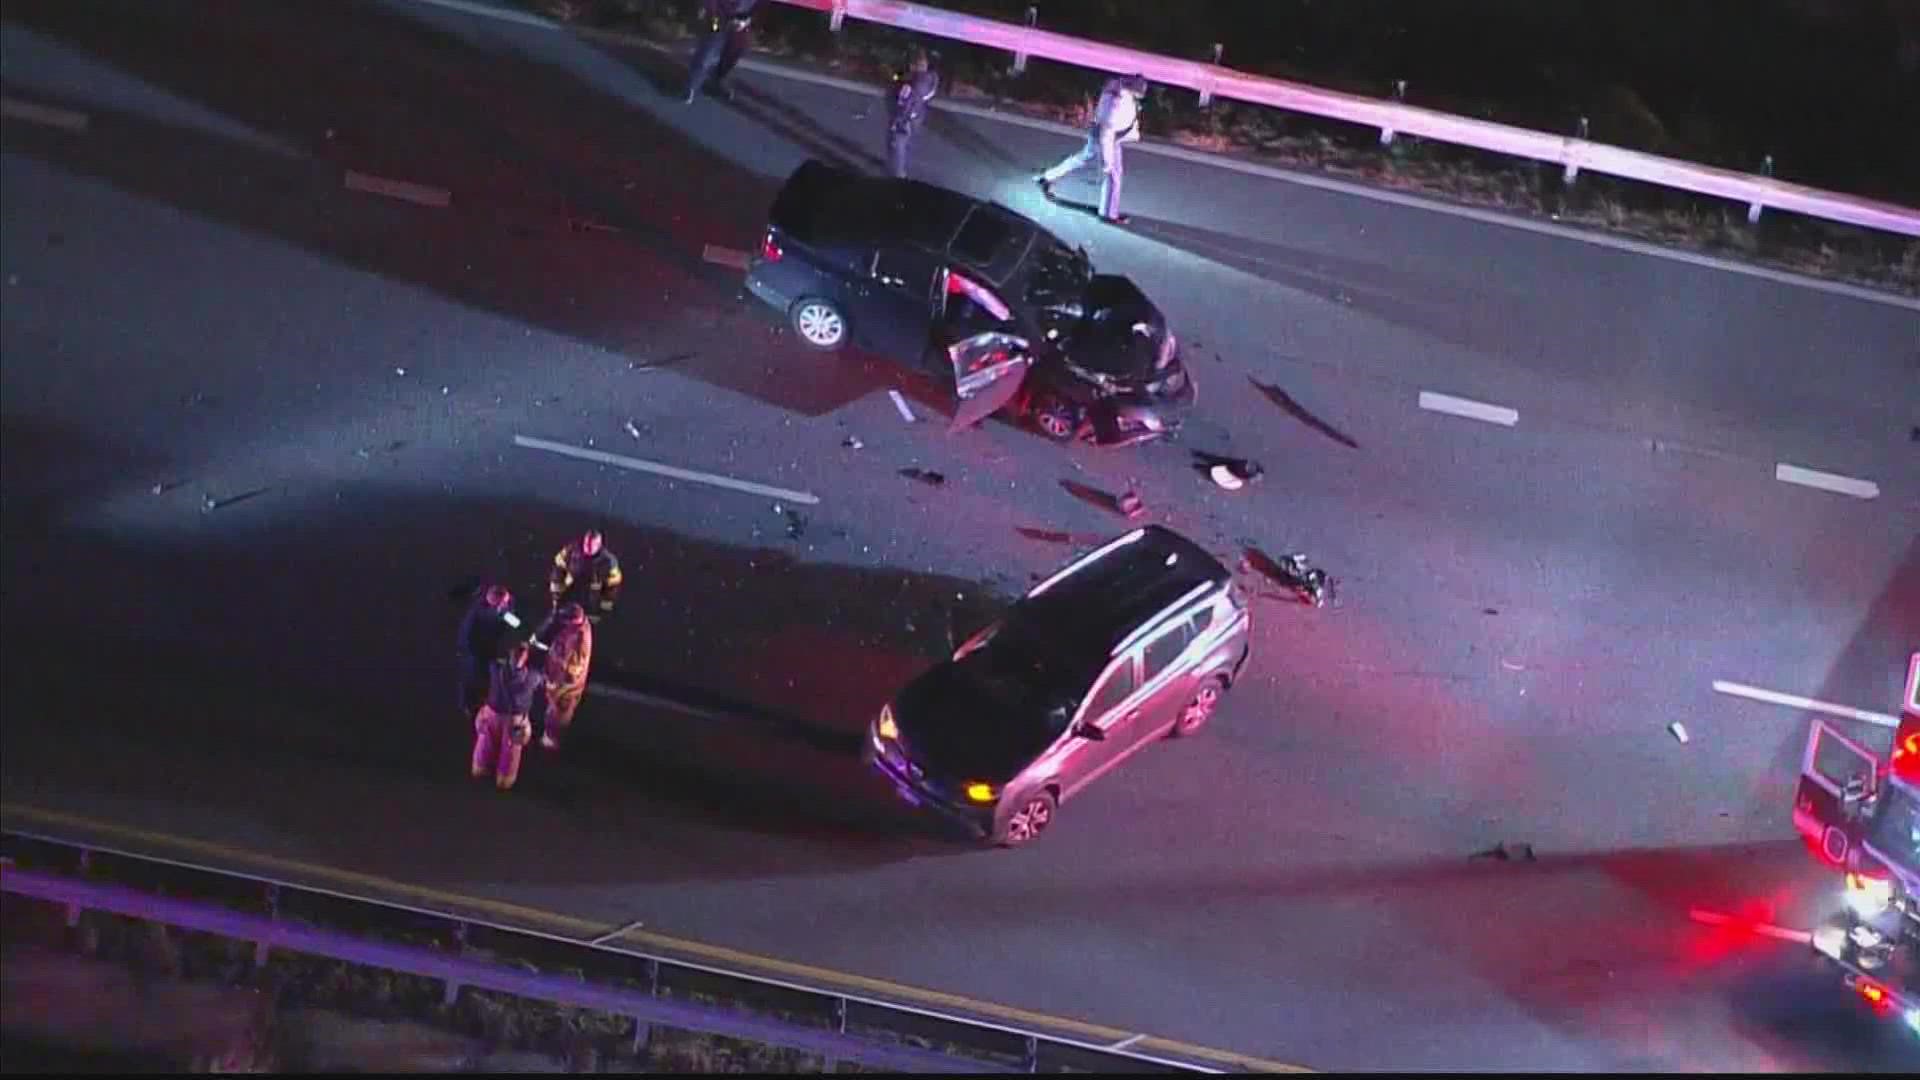 Two people have died after being hit by cars in Prince George's Co. and Fairfax Co. in separate incidents.